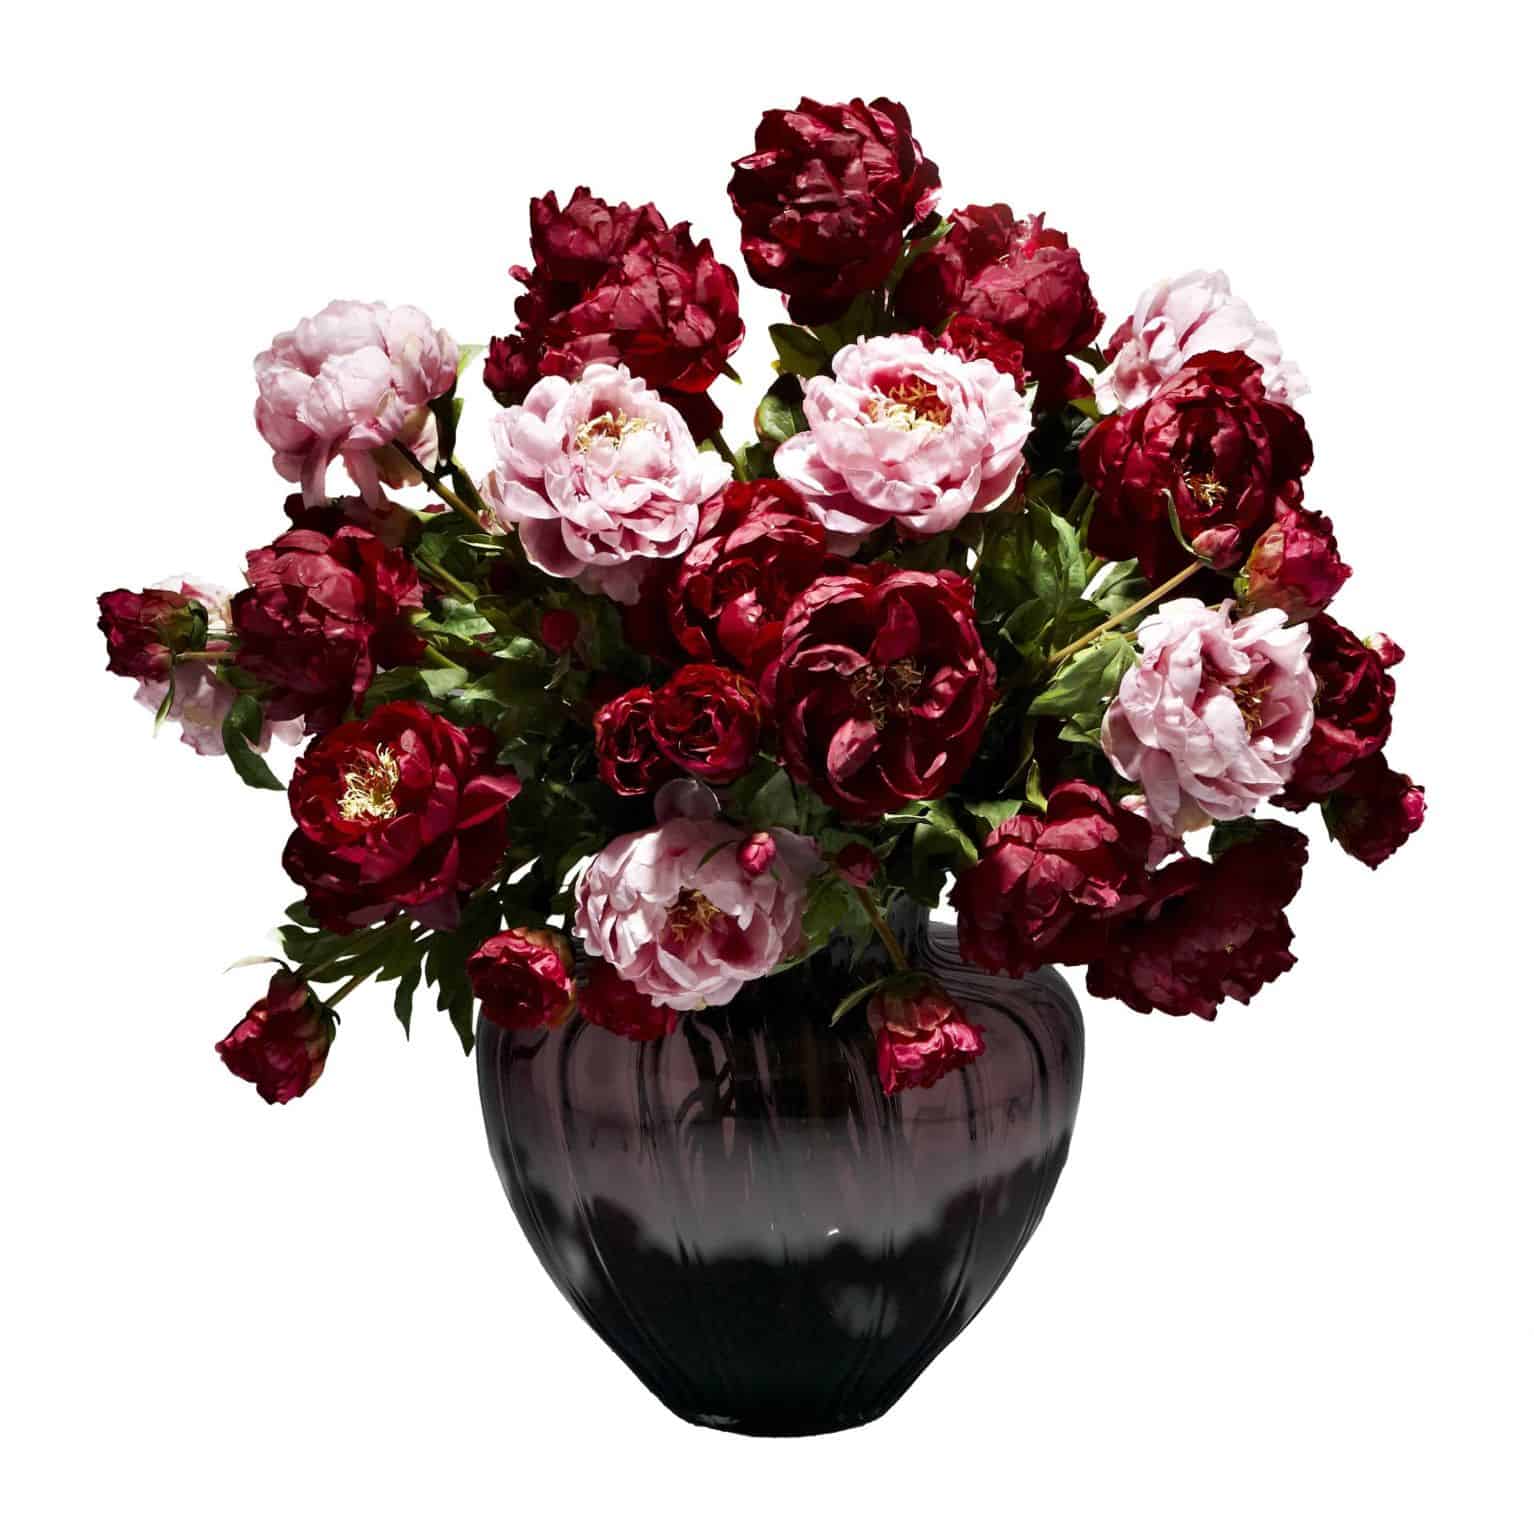 Shop for our lavish display of silk peony flowers in lavender and rich burgundy. Inspired by the paintings of extravagant blooms